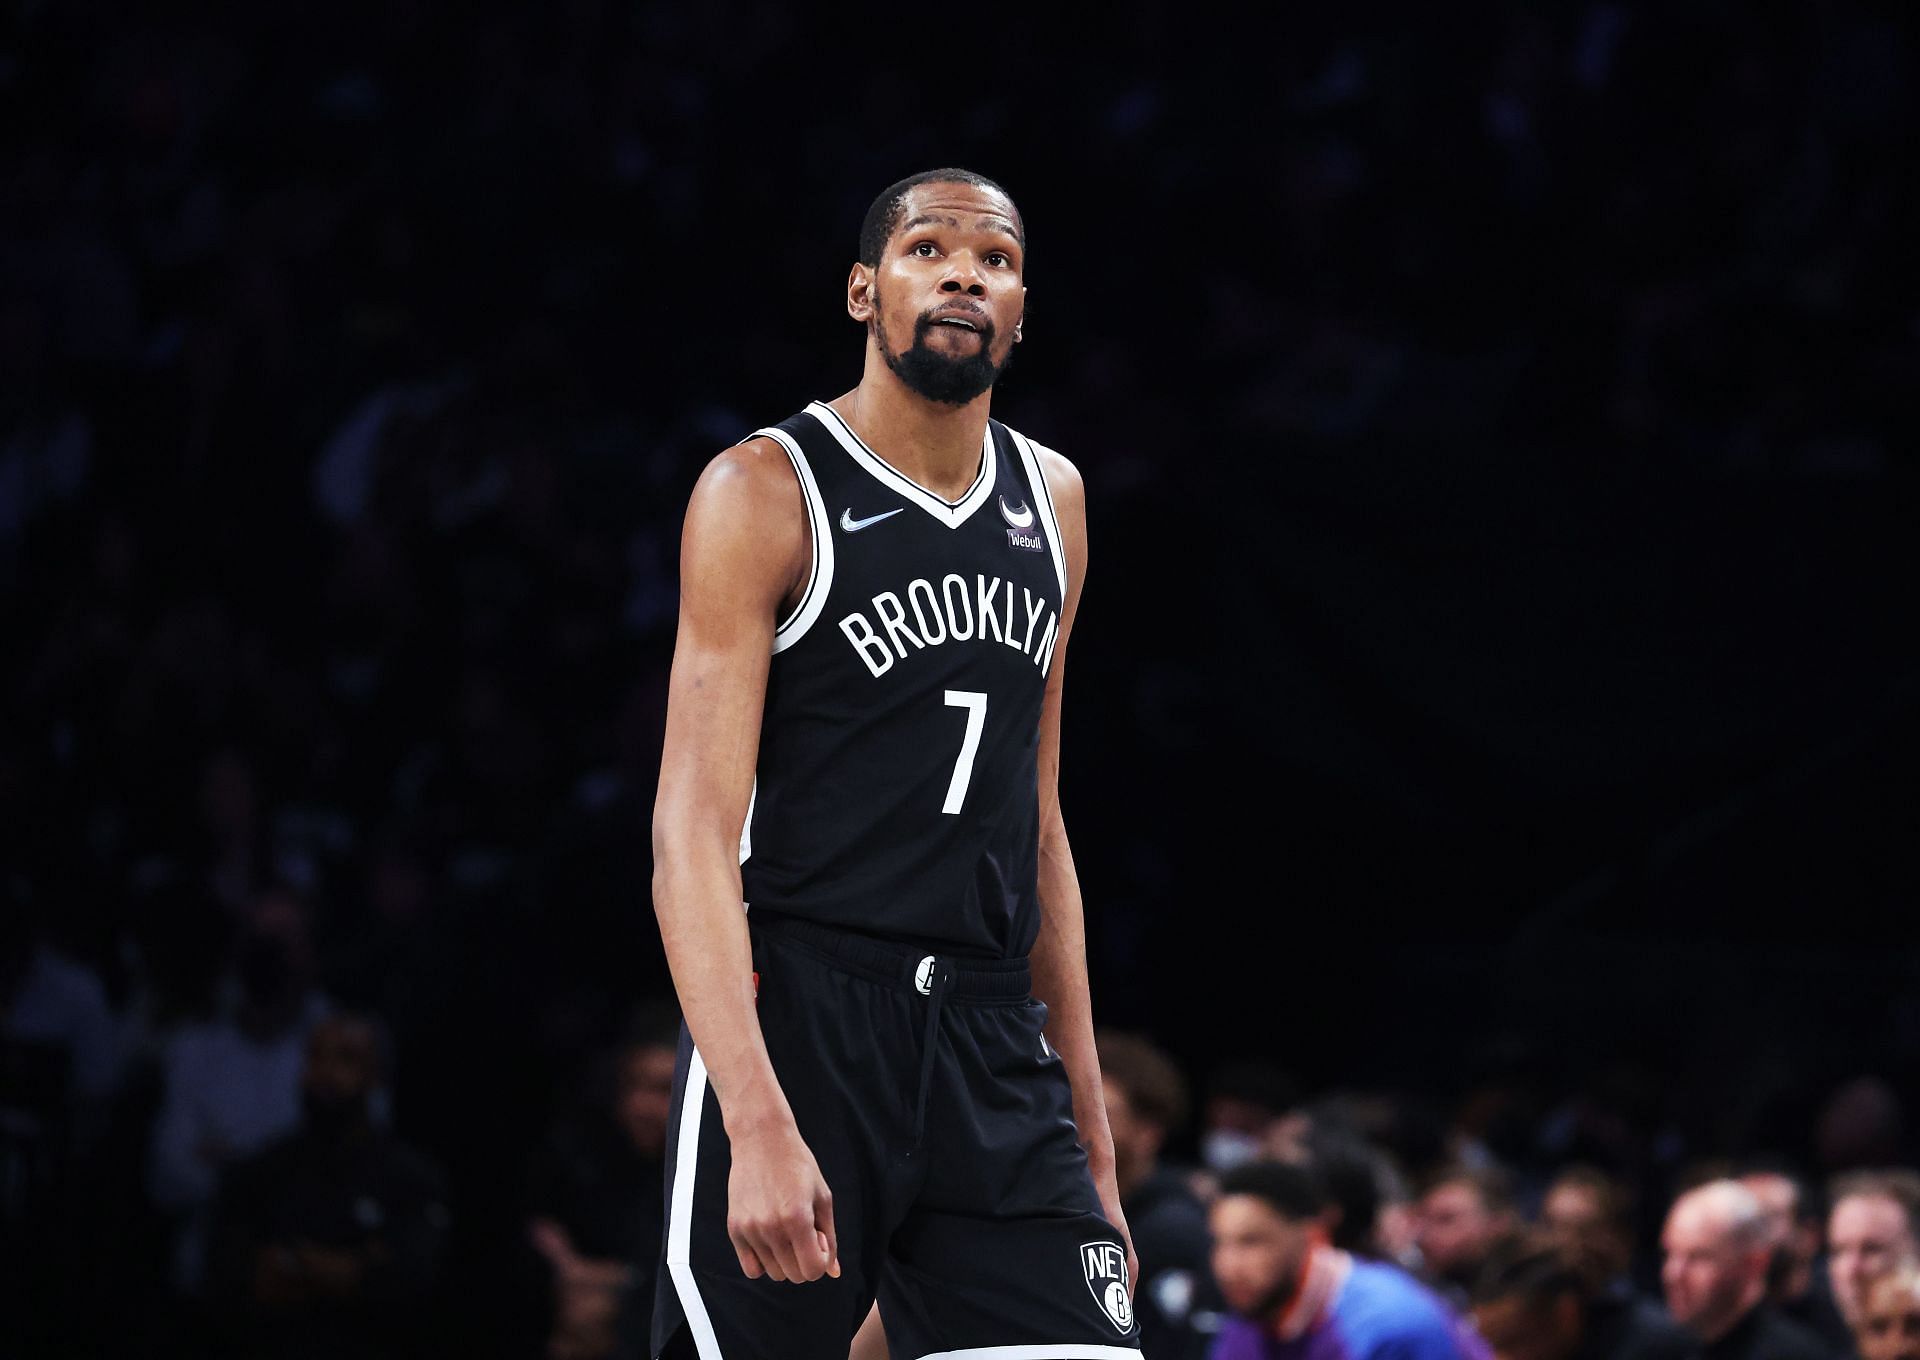 Kevin Durant of the Brooklyn Nets looks on against the Boston Celtics during Game 3 in the first round of the Eastern Conference playoffs at Barclays Center on April 23 in New York City.